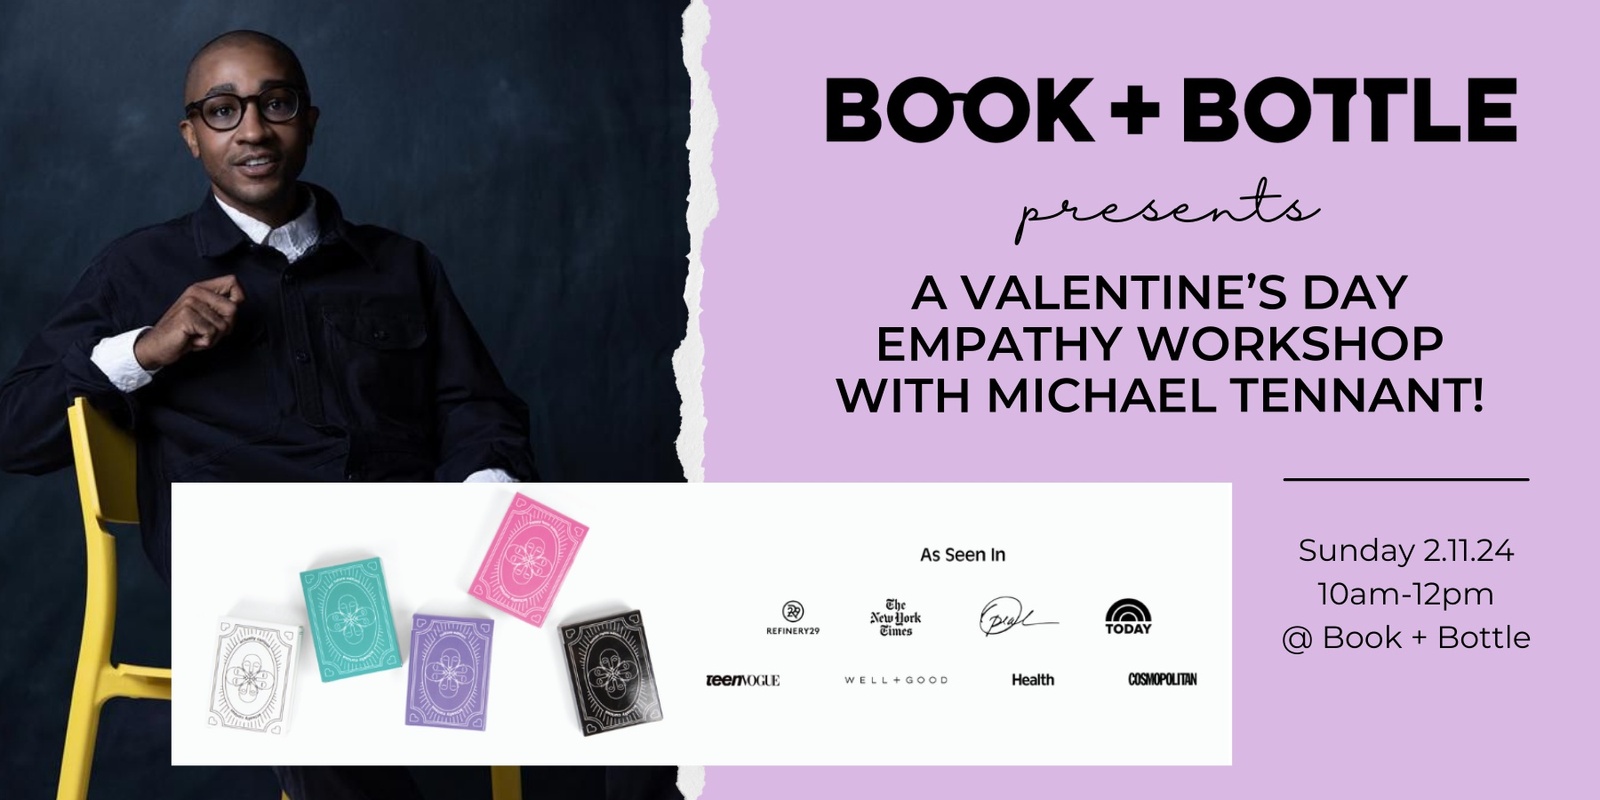 Banner image for Valentine's Day Conversation and Empathy Workshop for Friends and Lovers with Michael Tennant